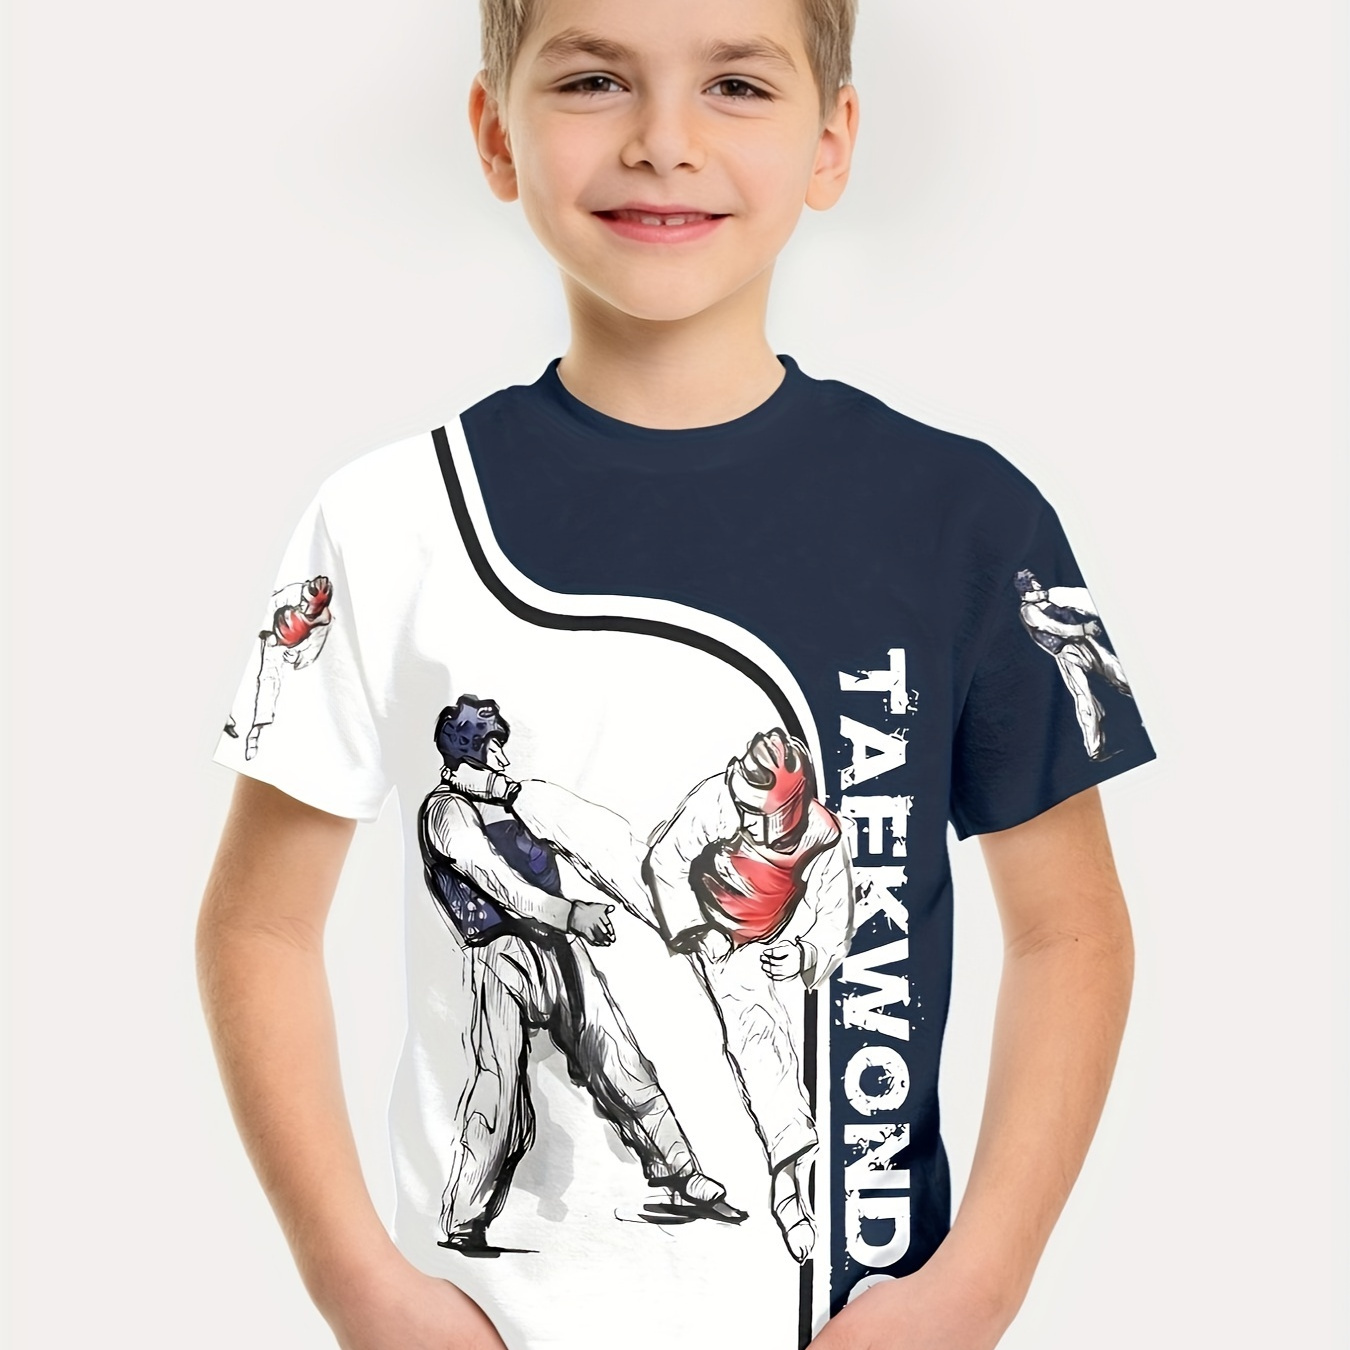 

Taekwondo 3d Print Boys Casual Short Sleeve T-shirts - Comfortable & Stylish Tops For Summer - Ideal Gift For Your Fashionistas